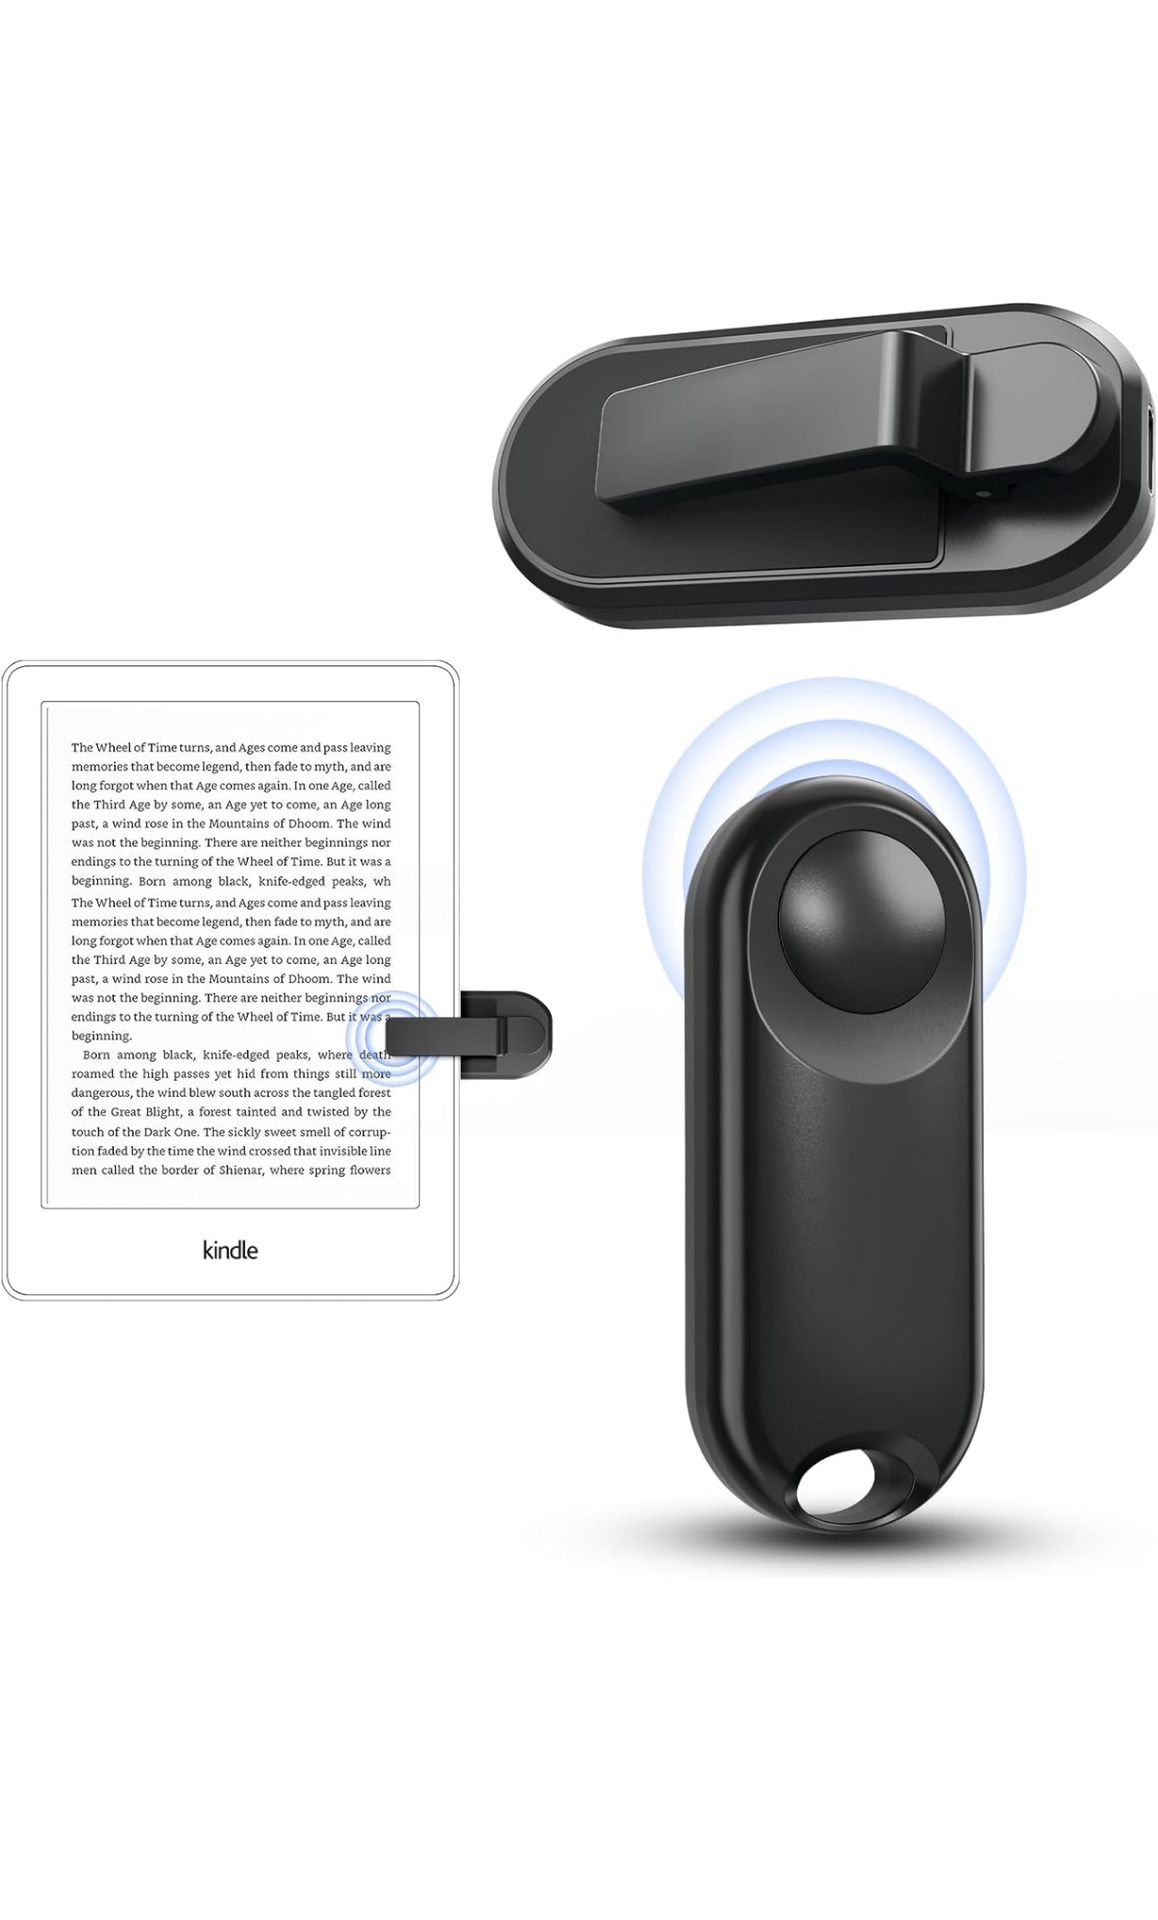 Page Turner for Kindle Remote Control